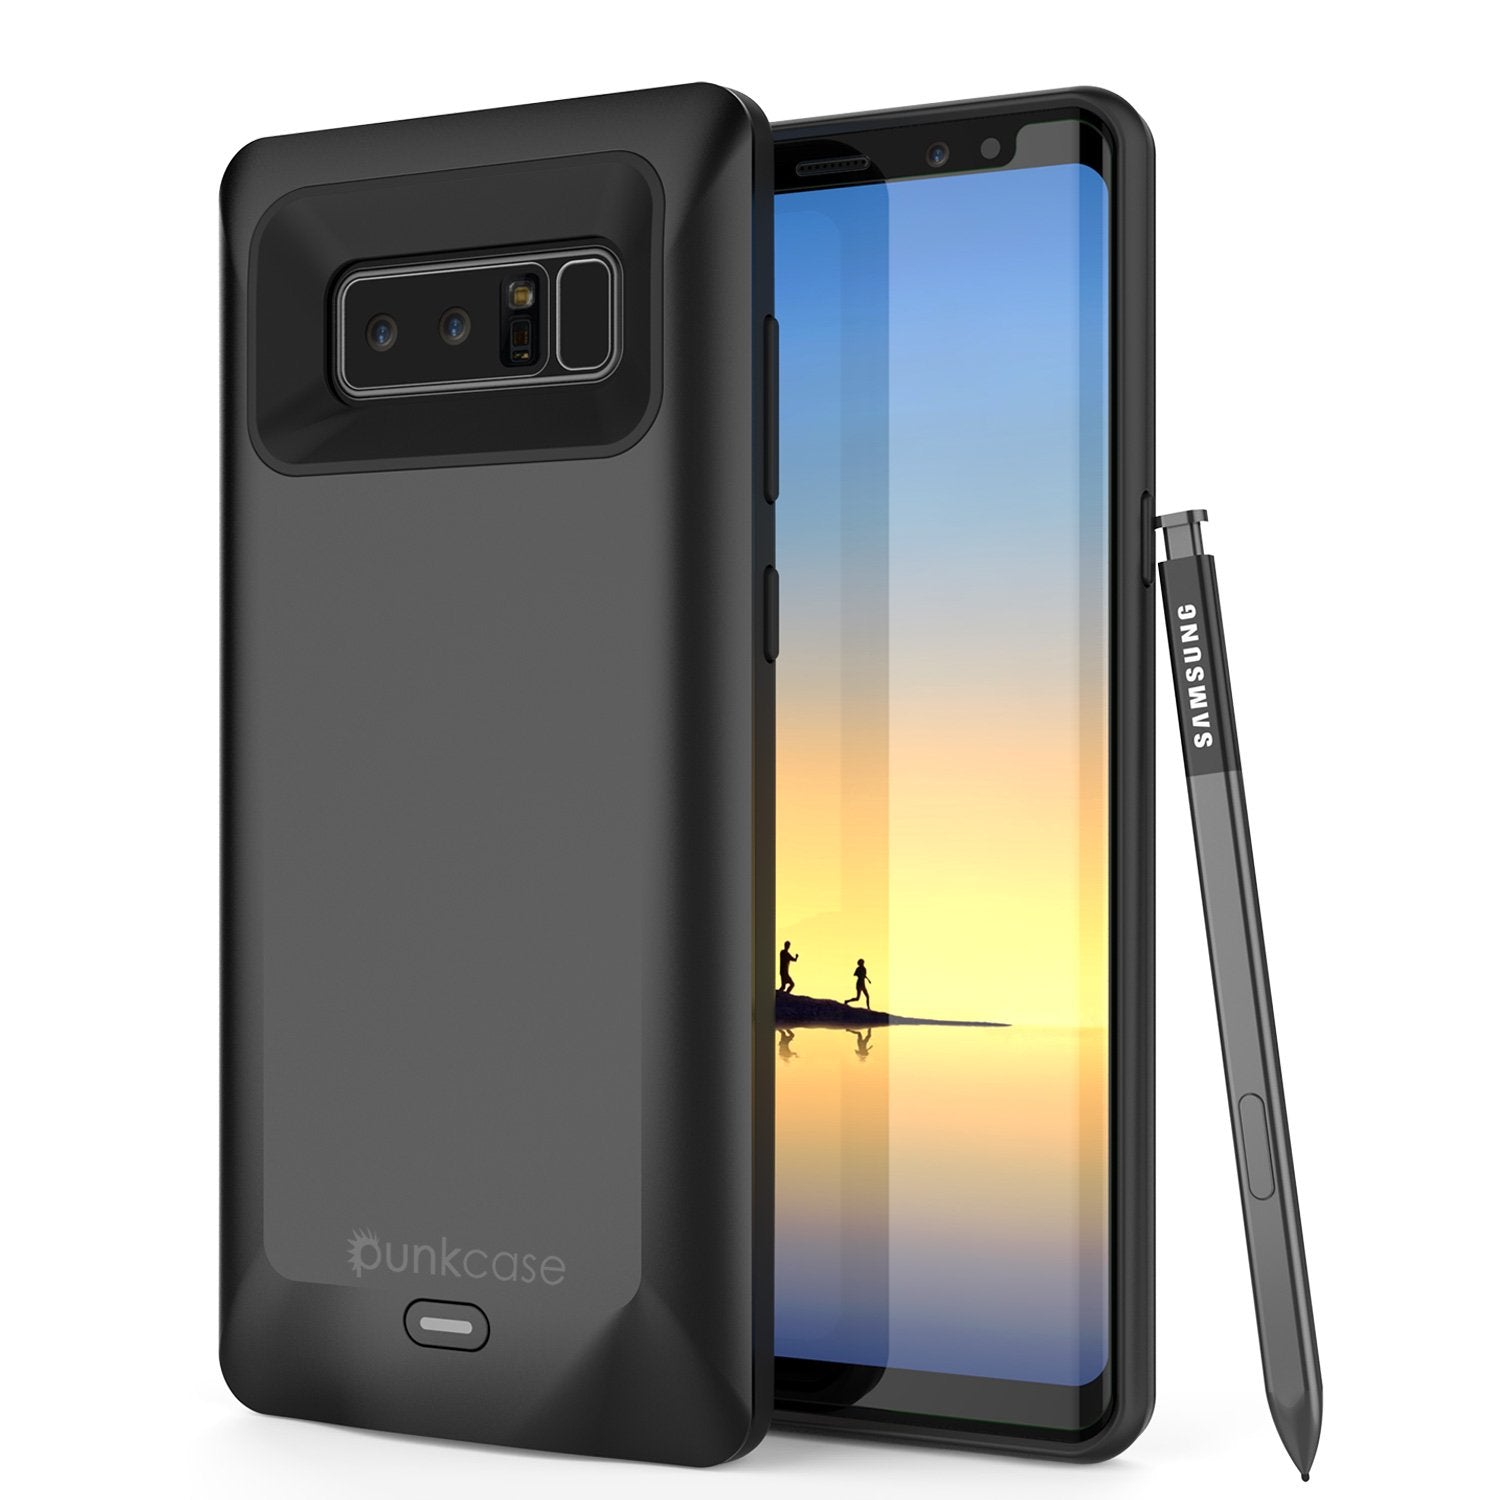 Galaxy Note 8 Battery Case, Punkcase 5000mAH Charger Case W/ Screen Protector | Integrated USB Port | IntelSwitch [Gold]